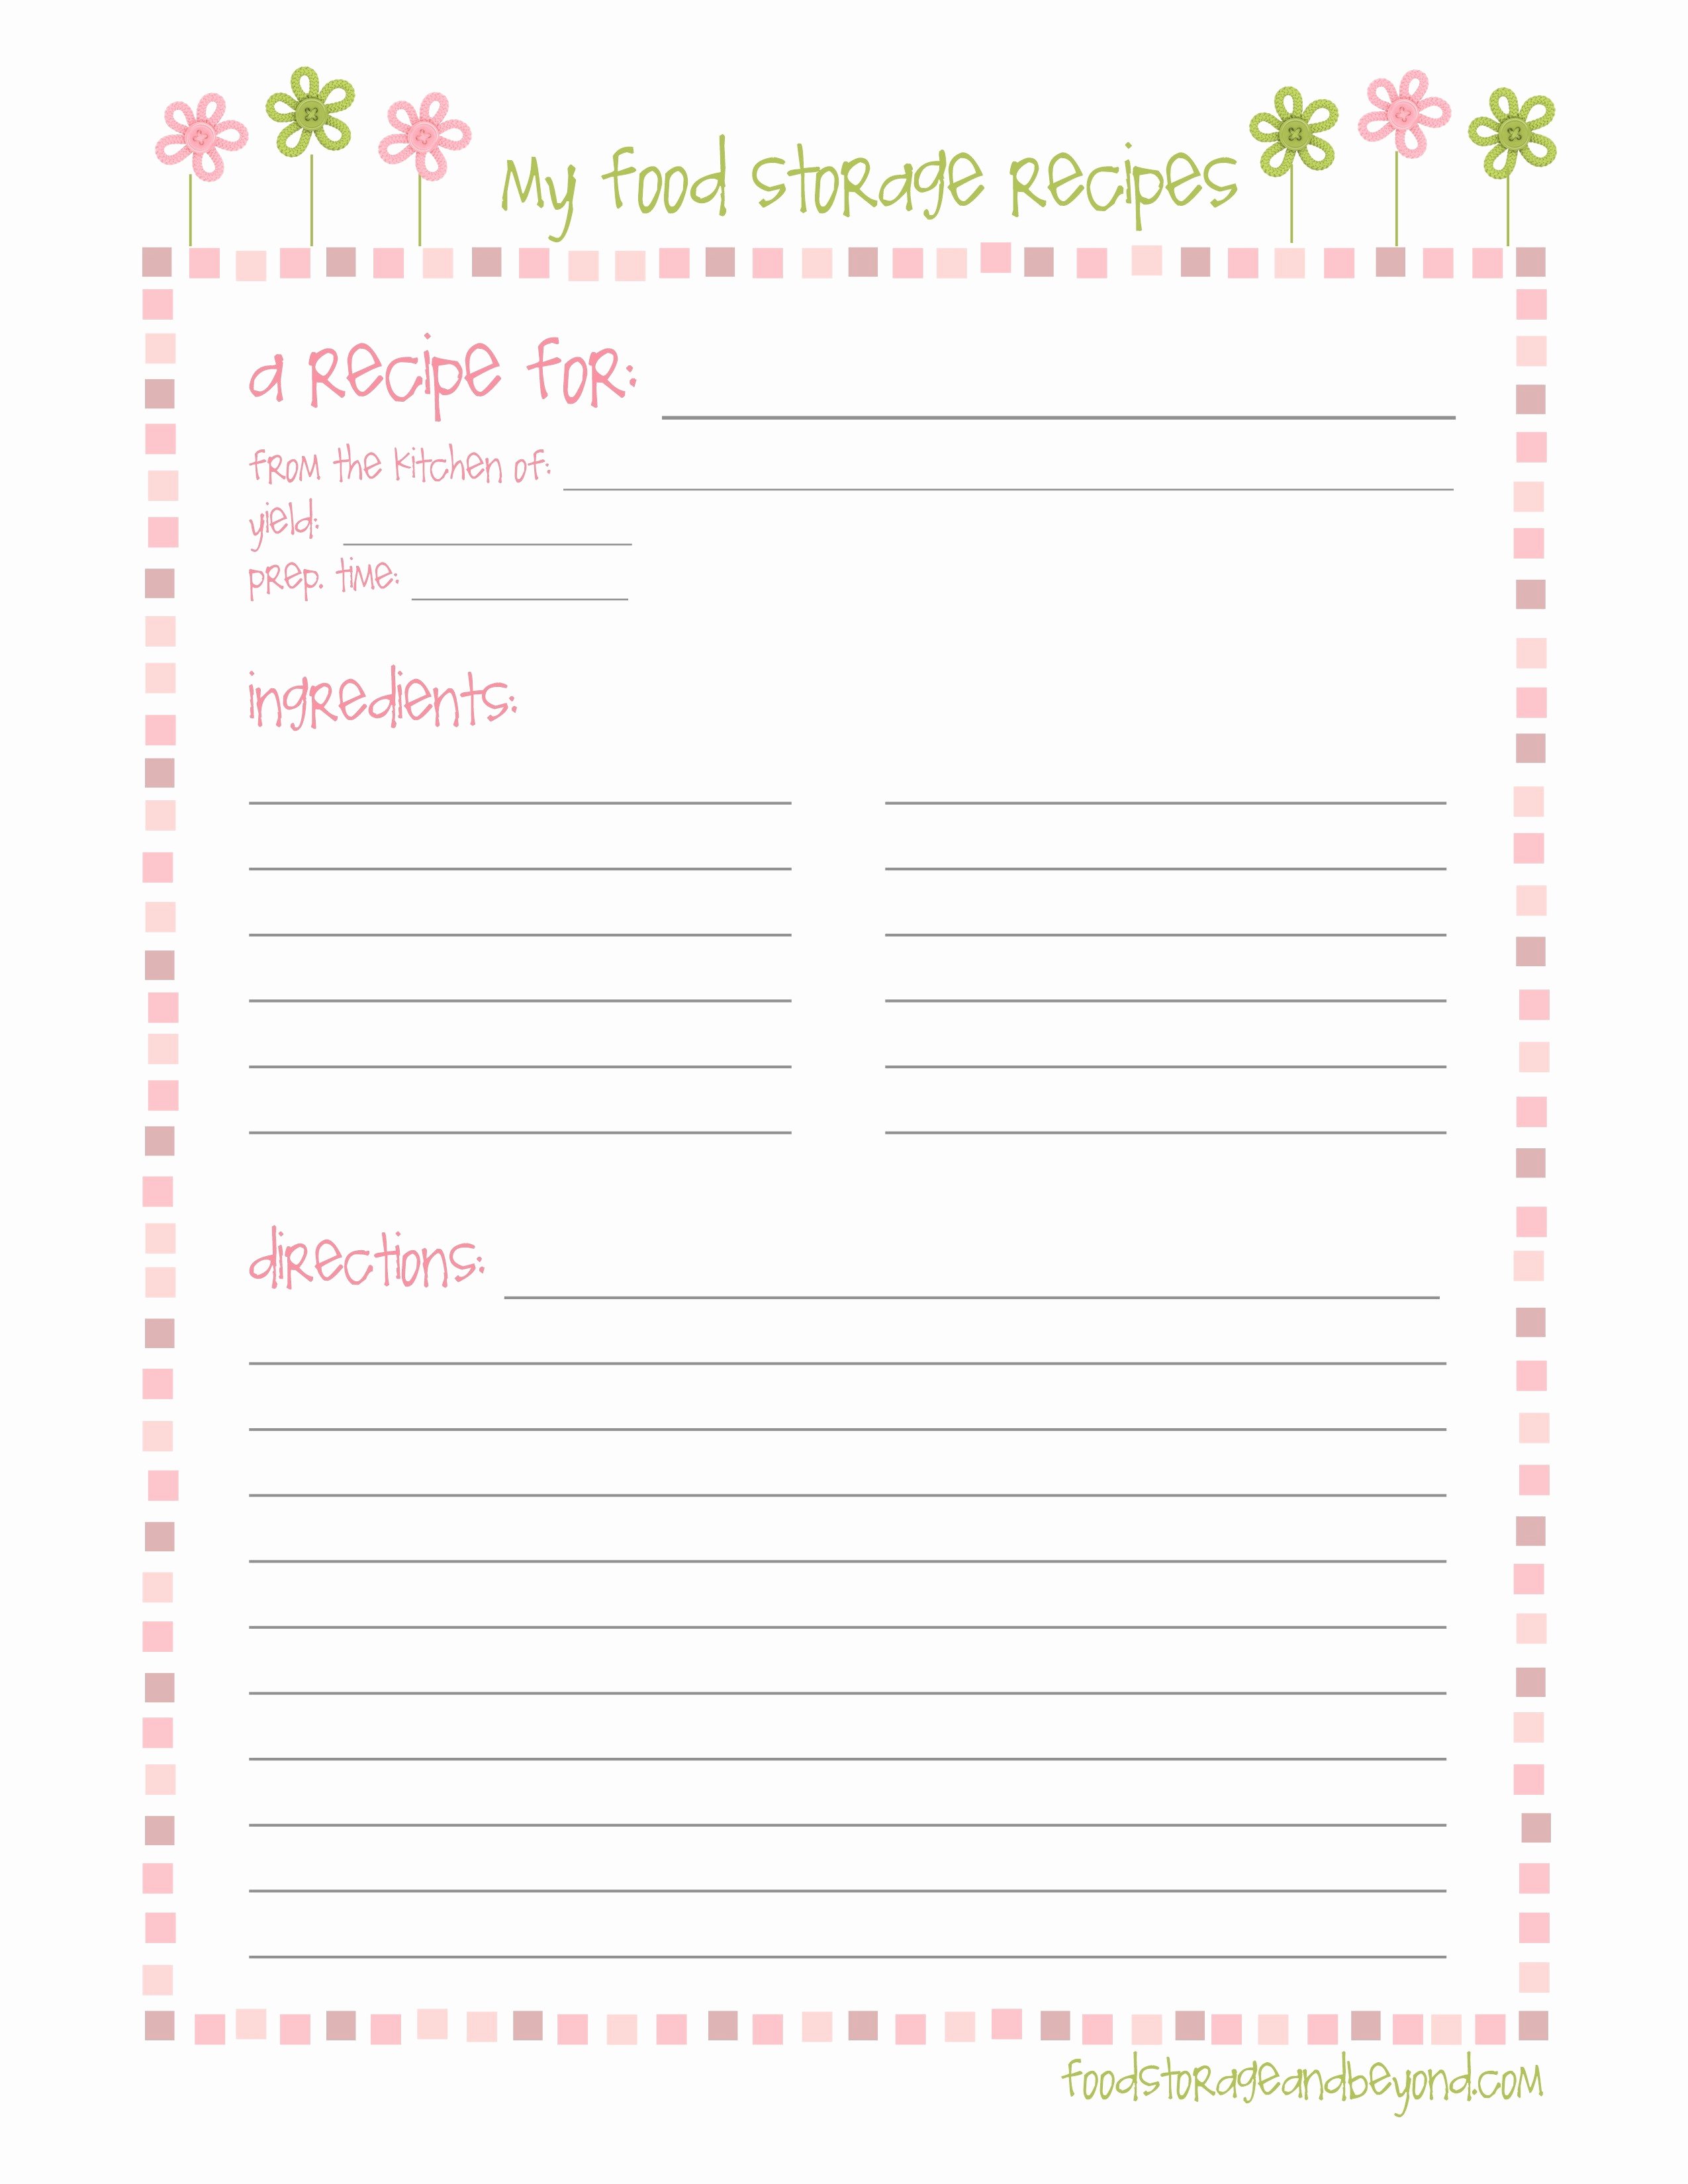 Recipe Card Template for Pages Awesome Free Recipe Templates 8x11 Flowersheet